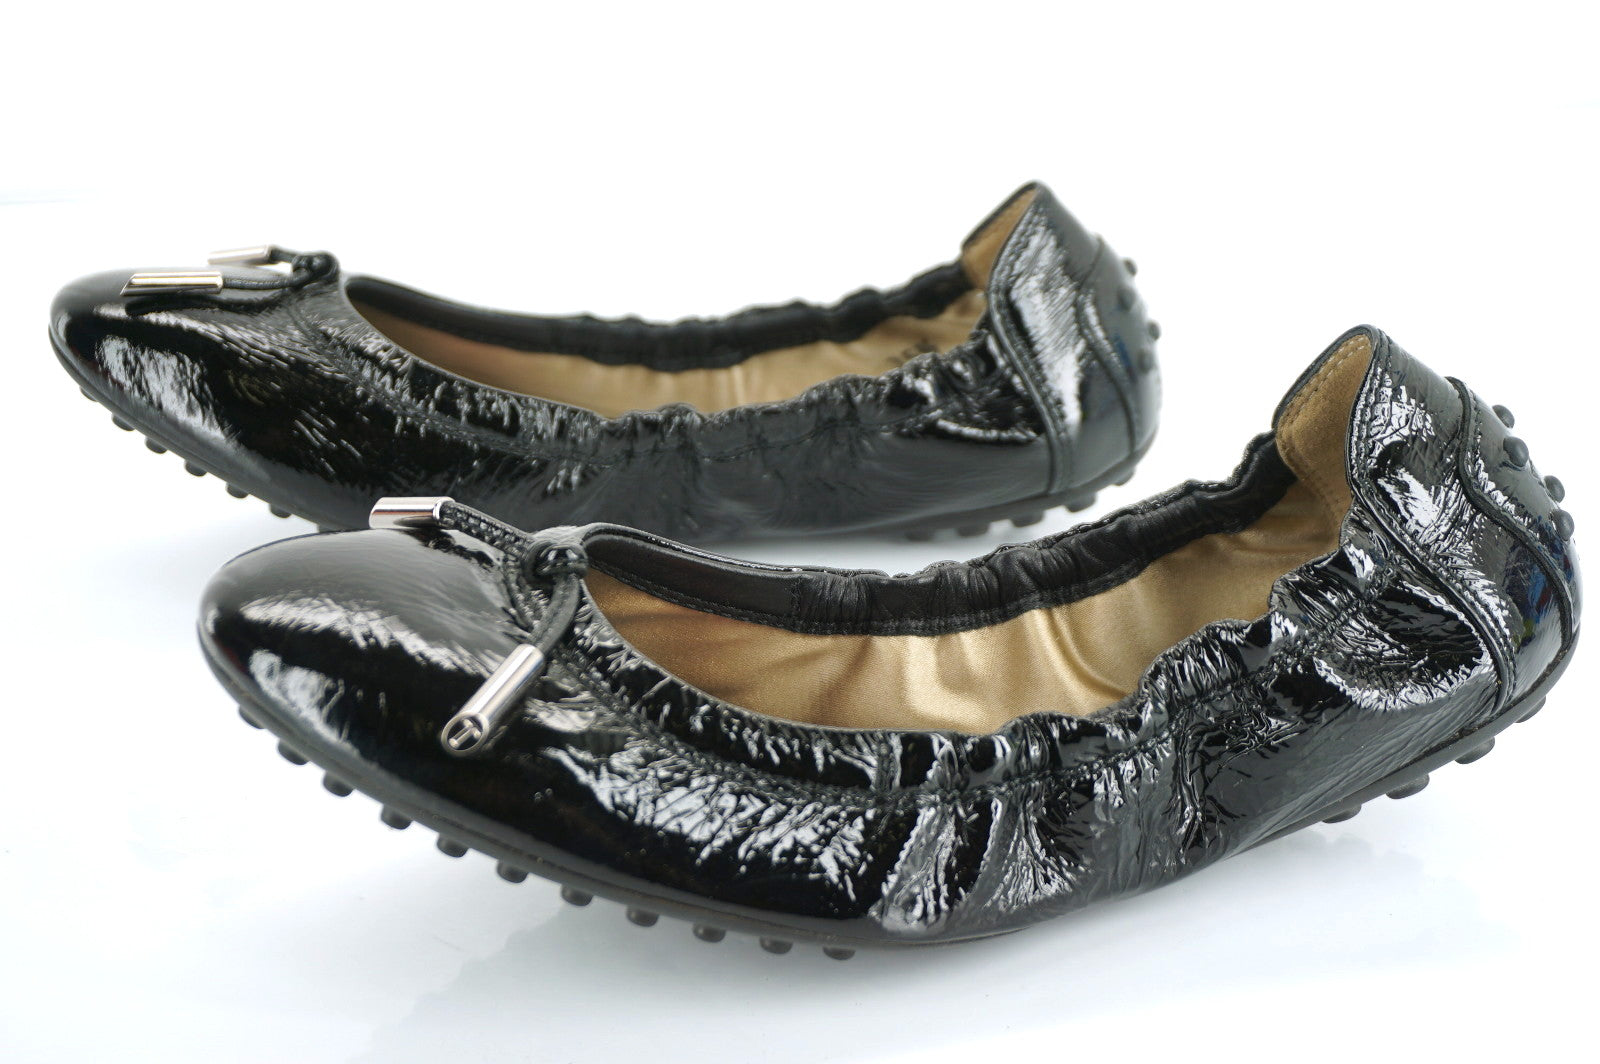 Tod's Dee Laccetto Black Patent Leather Ballet Flats size 35.5 Womens Italy made